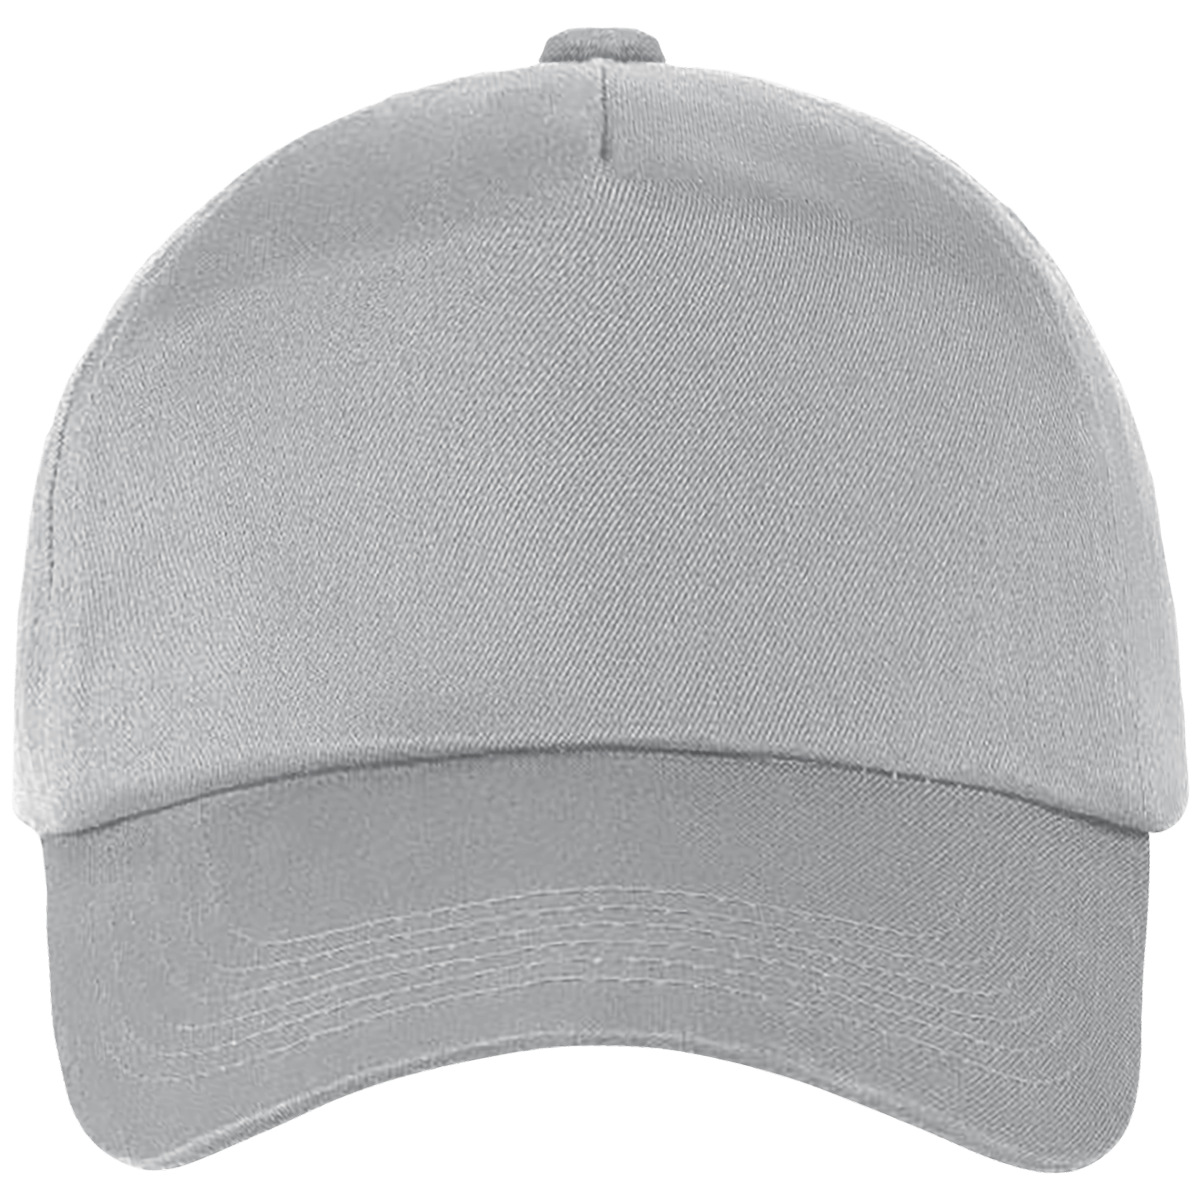 Customizable Fashion Cap In Embroidery And Printing Light Grey